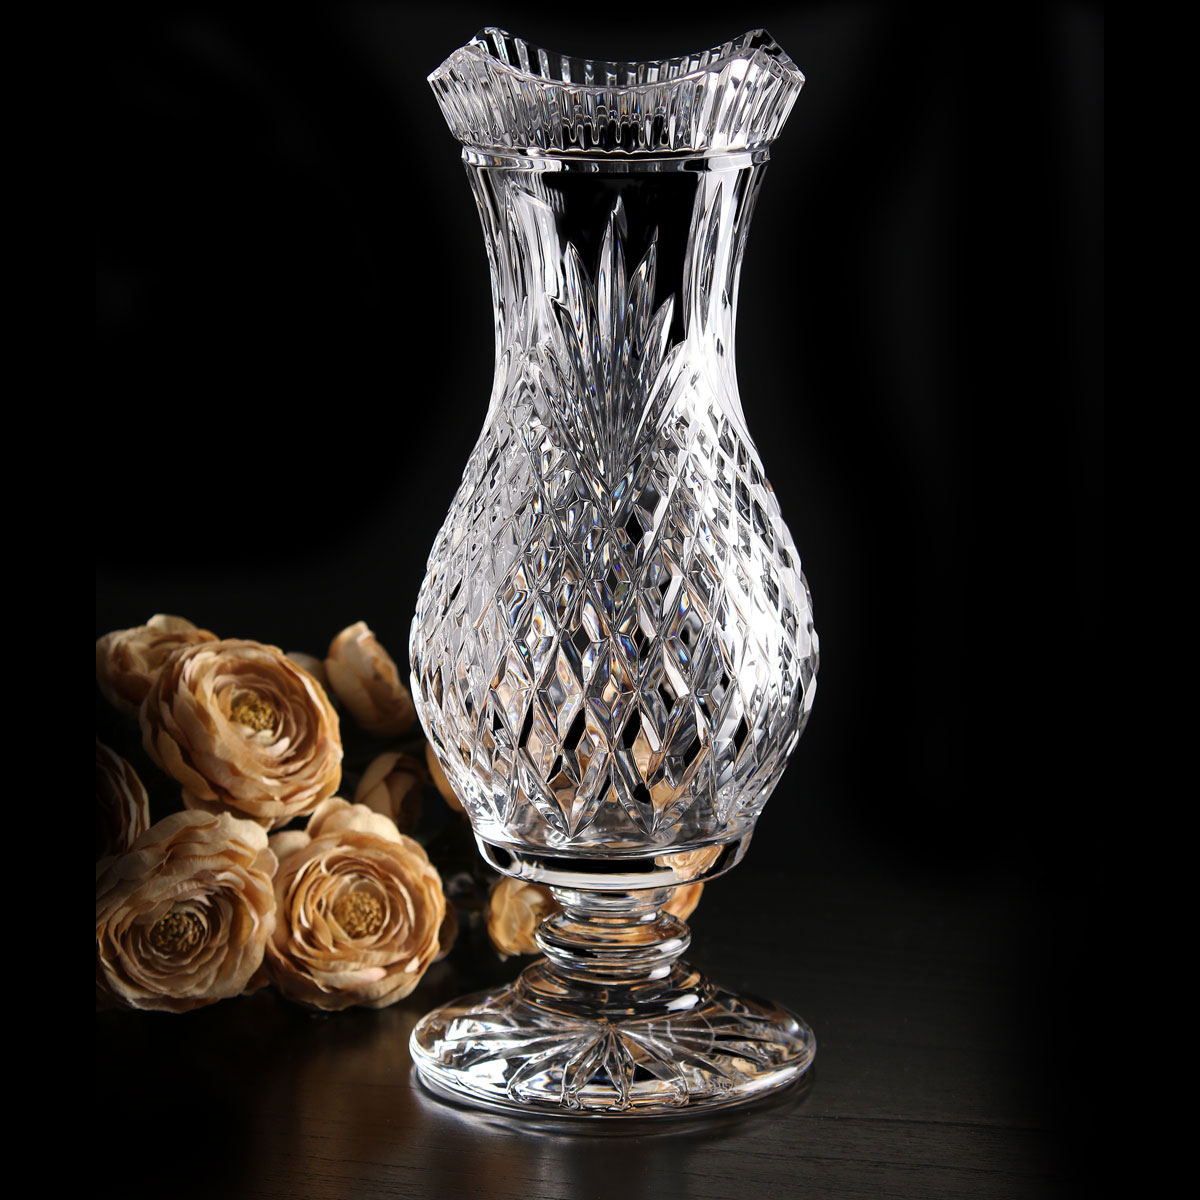 Cashs Ireland, Art Collection Liffey Footed Crystal Vase, Limited Edition